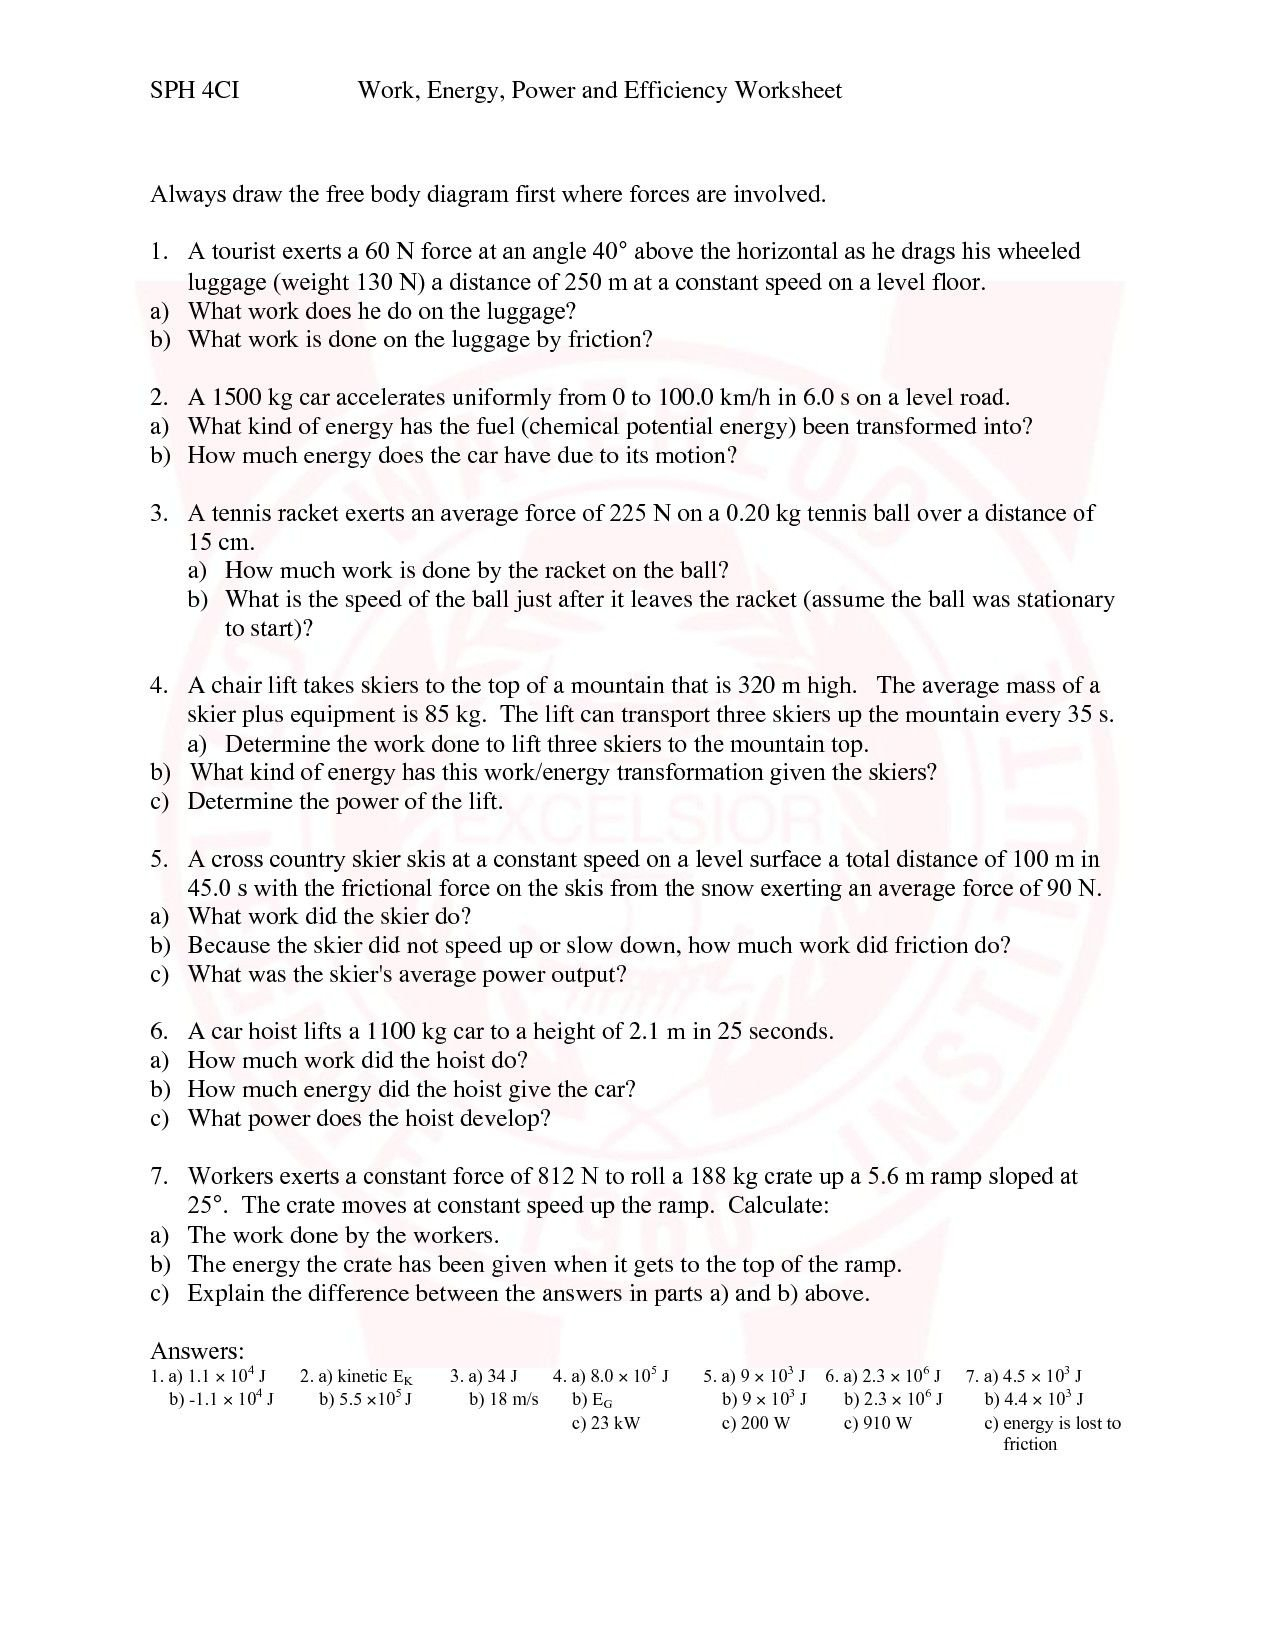 Energy Conversion And Conservation Worksheet Answers 5 2 Intended For Energy Conversion And Conservation Worksheet Answers 5 2